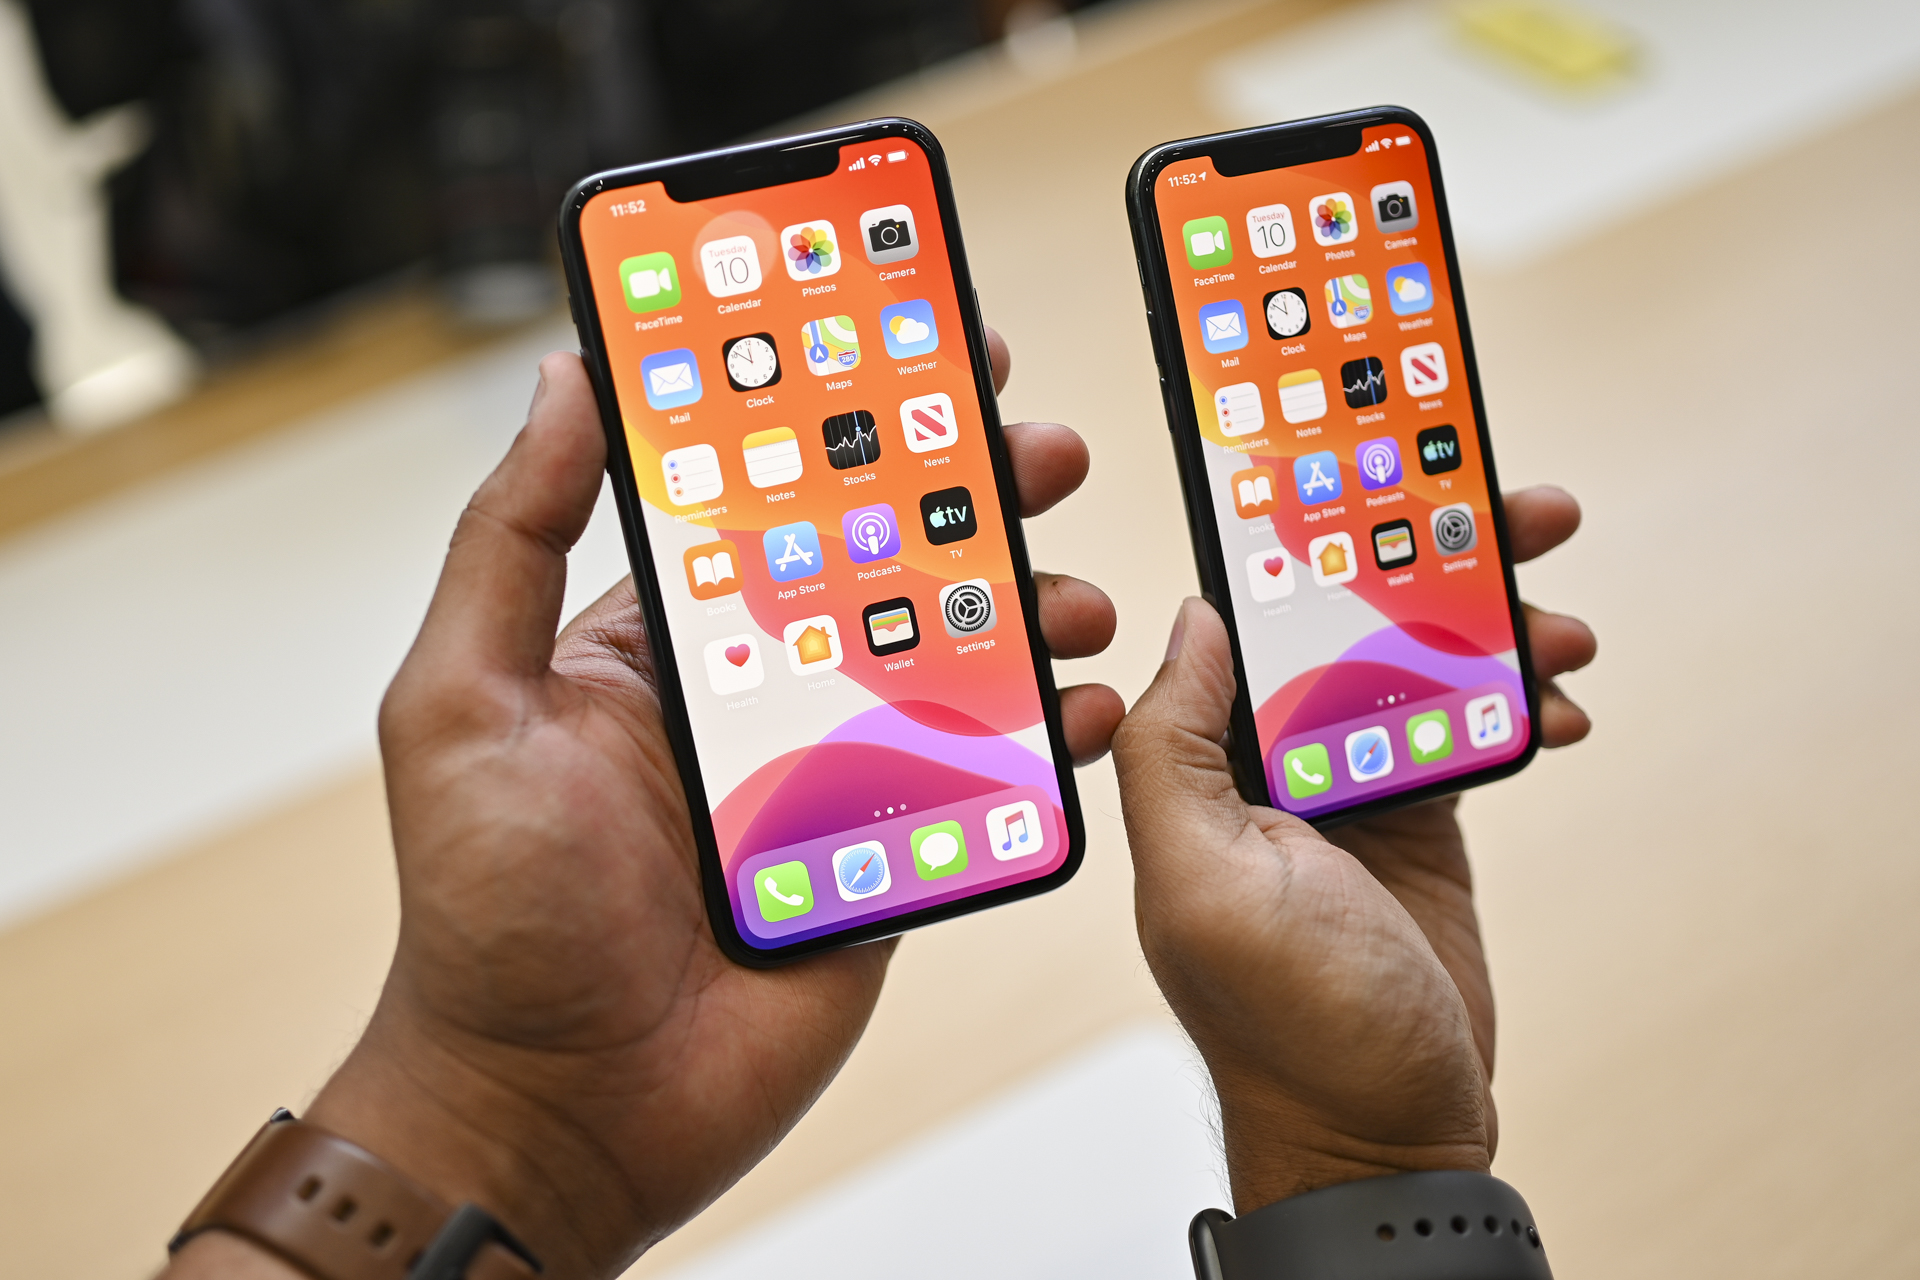 Hands on with Apple's iPhone 11 Pro and iPhone 11 Pro Max